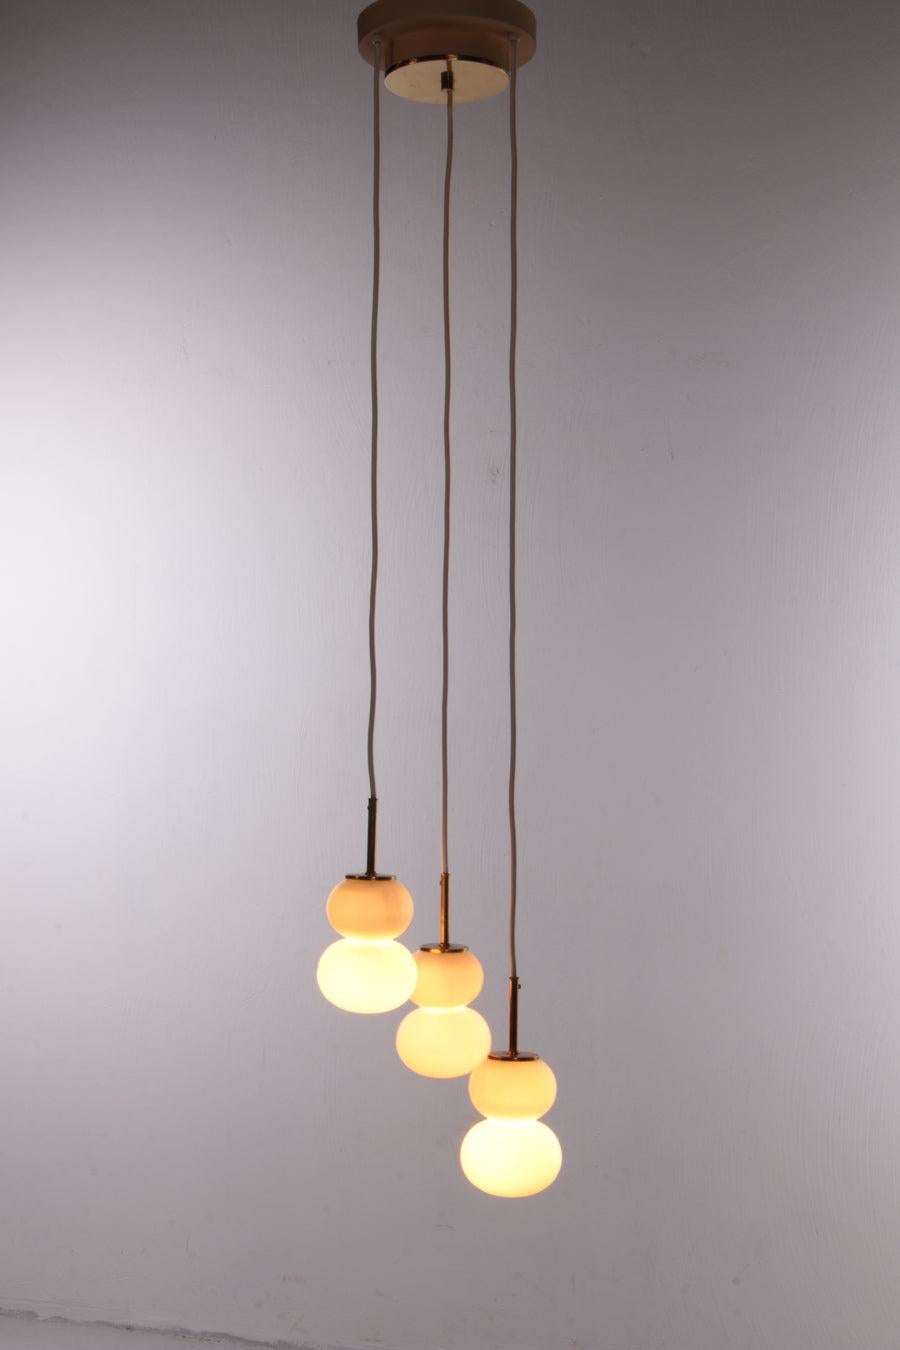 Doria Pendant lamp Model Pumpkin Cascade, 1960s Germany

Vintage ceiling lamp with three opal glass spheres, 1960 Germany

The pendant lamp canopy, the central parts of the power cords and the lamp holders show off an electrophoretic brass finish,